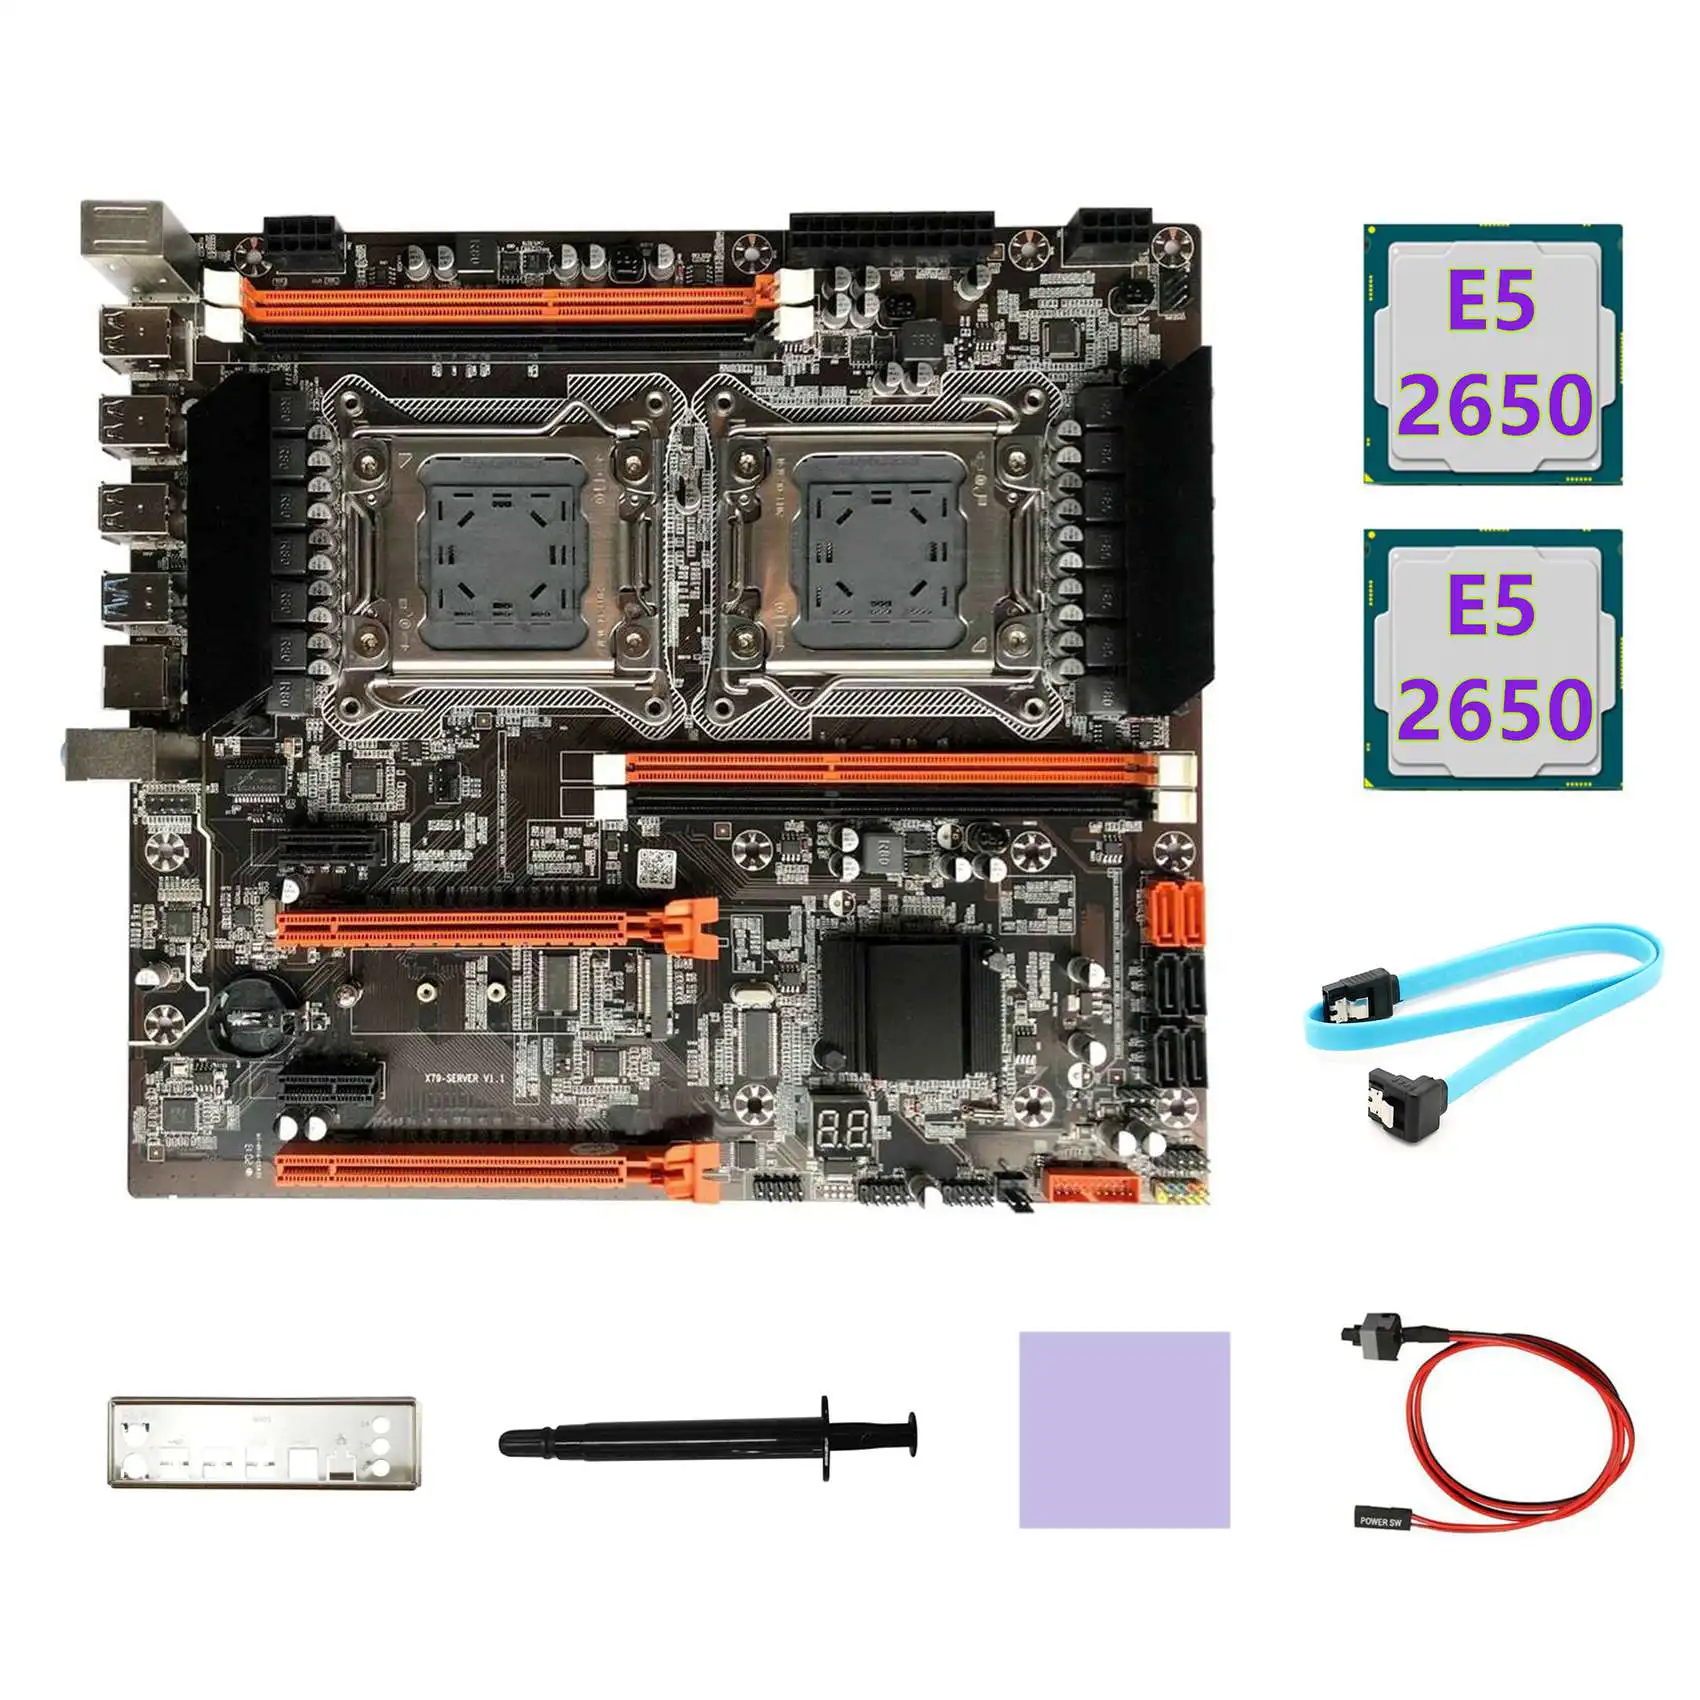 

X79 Dual CPU Motherboard+2XE5 2650 CPU+SATA Cable+Switch Cable+Baffle+Thermal Grease+Thermal Pad LGA2011 X79 Motherboard